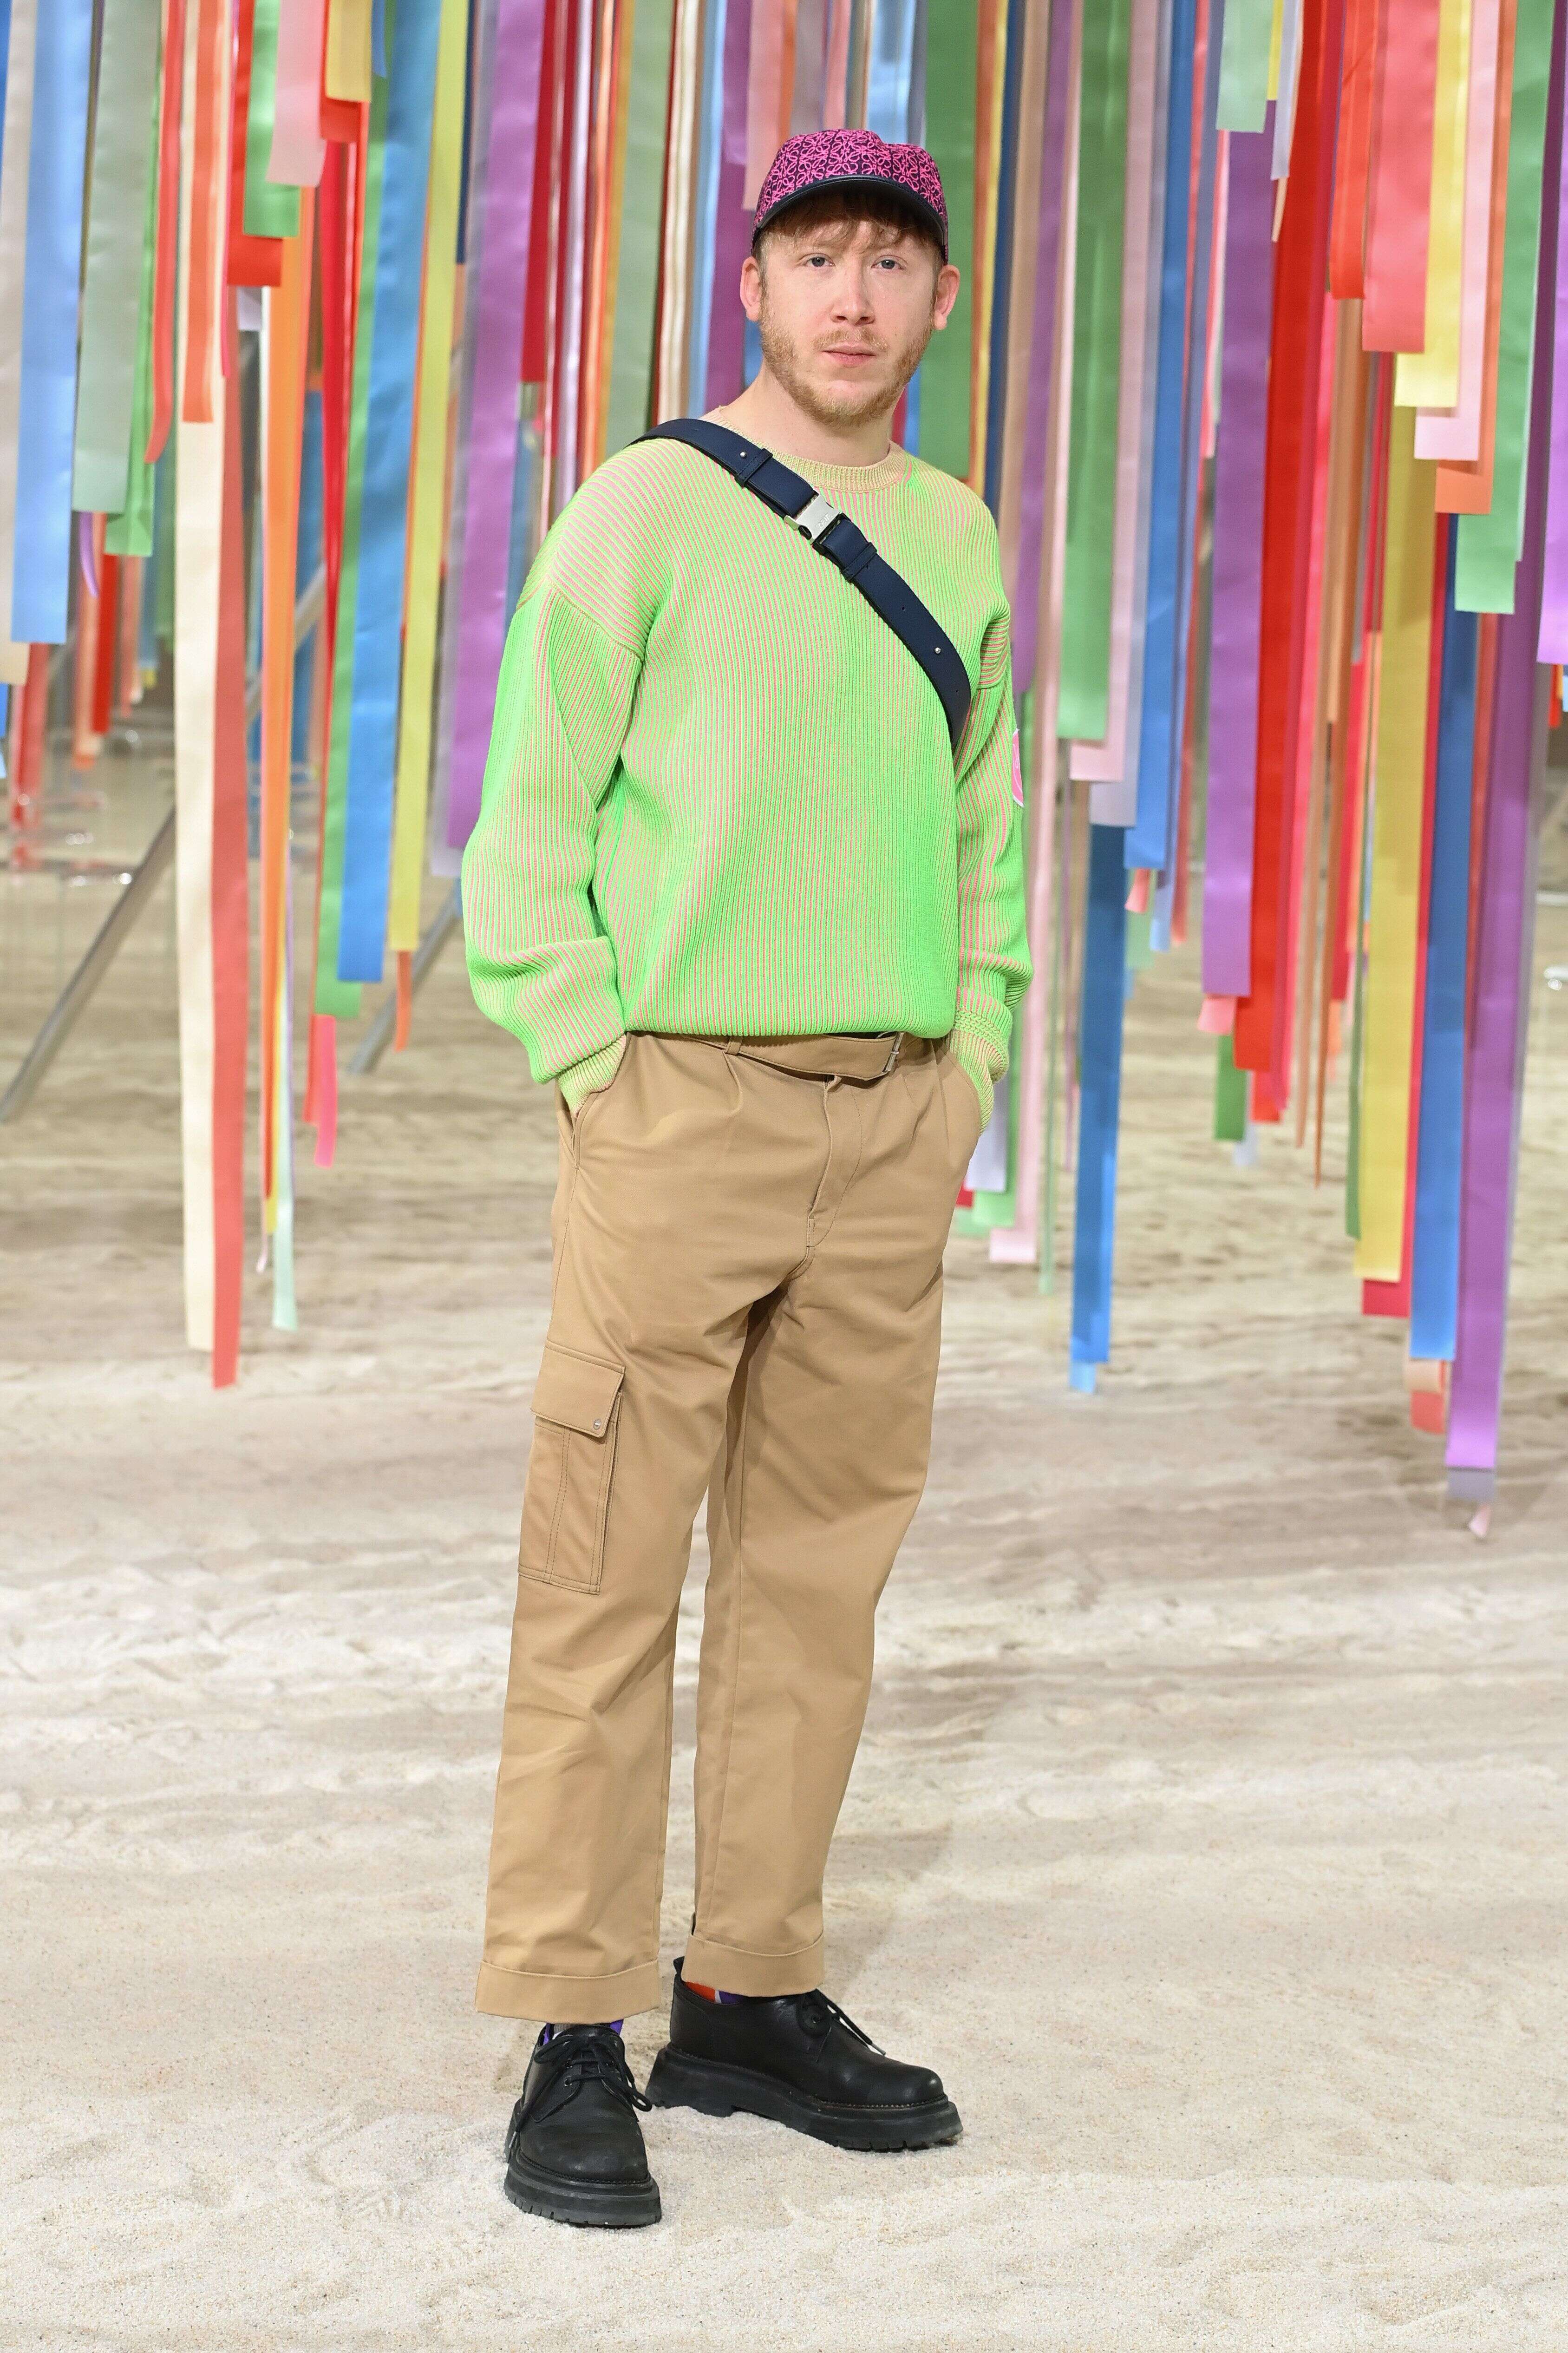 PARIS, FRANCE - JANUARY 22: (EDITORIAL USE ONLY - For Non-Editorial use please seek approval from Fashion House) Eddy de Pretto walks the runway during the Loewe Menswear Fall/Winter 2022-2023 show as part of Paris Fashion Week on January 22, 2022 in Paris, France. (Photo by Pascal Le Segretain/Getty Images)